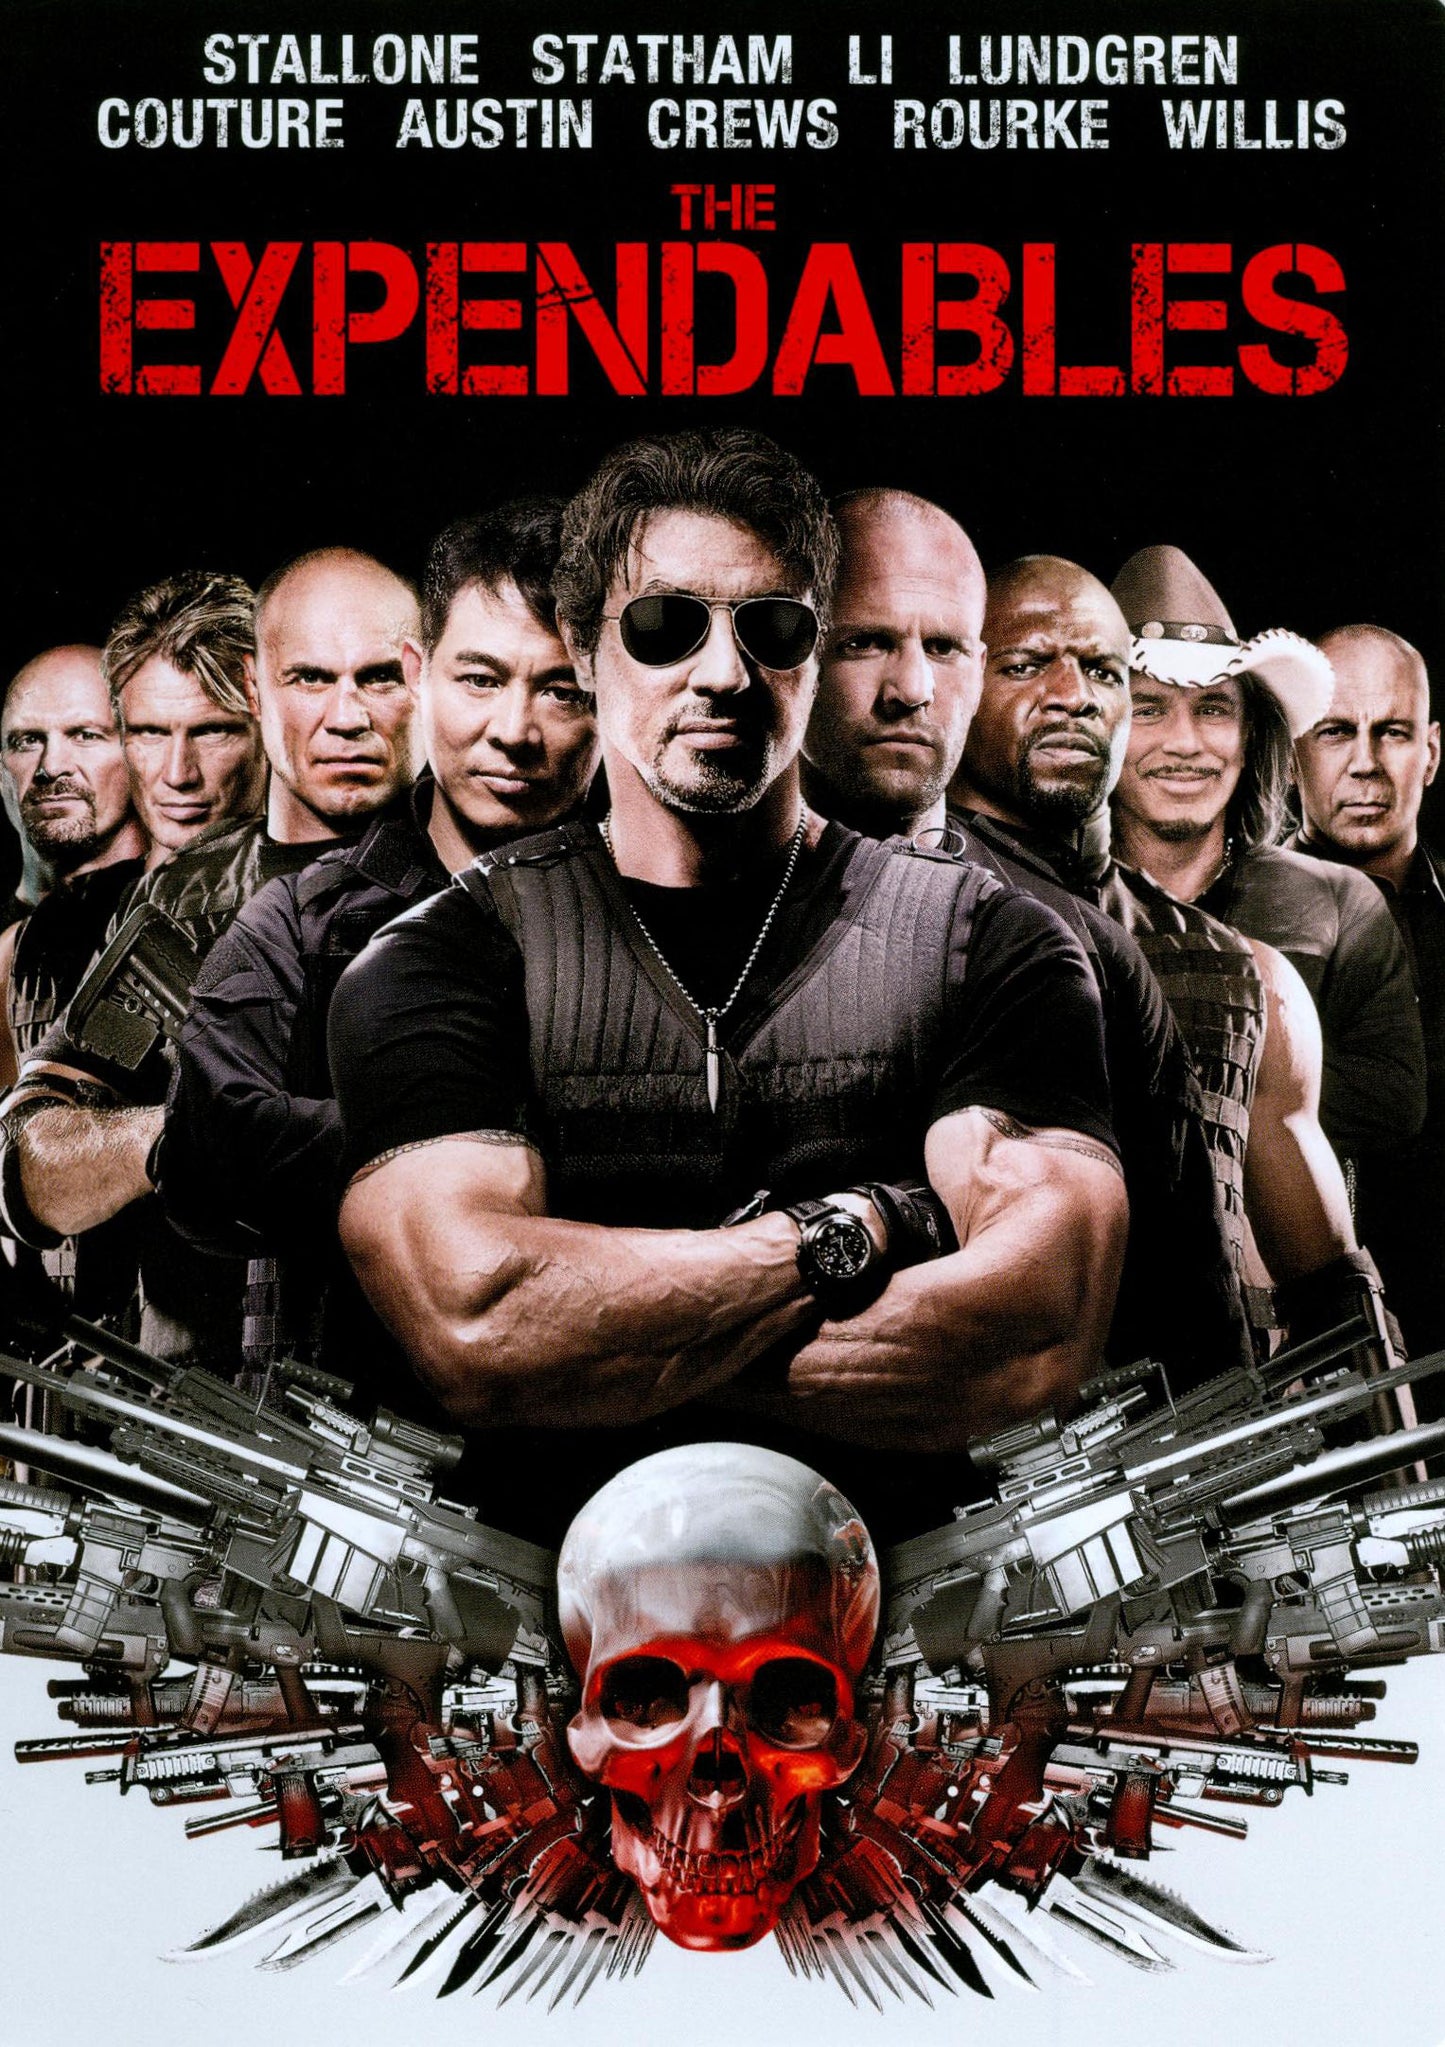 Expendables cover art